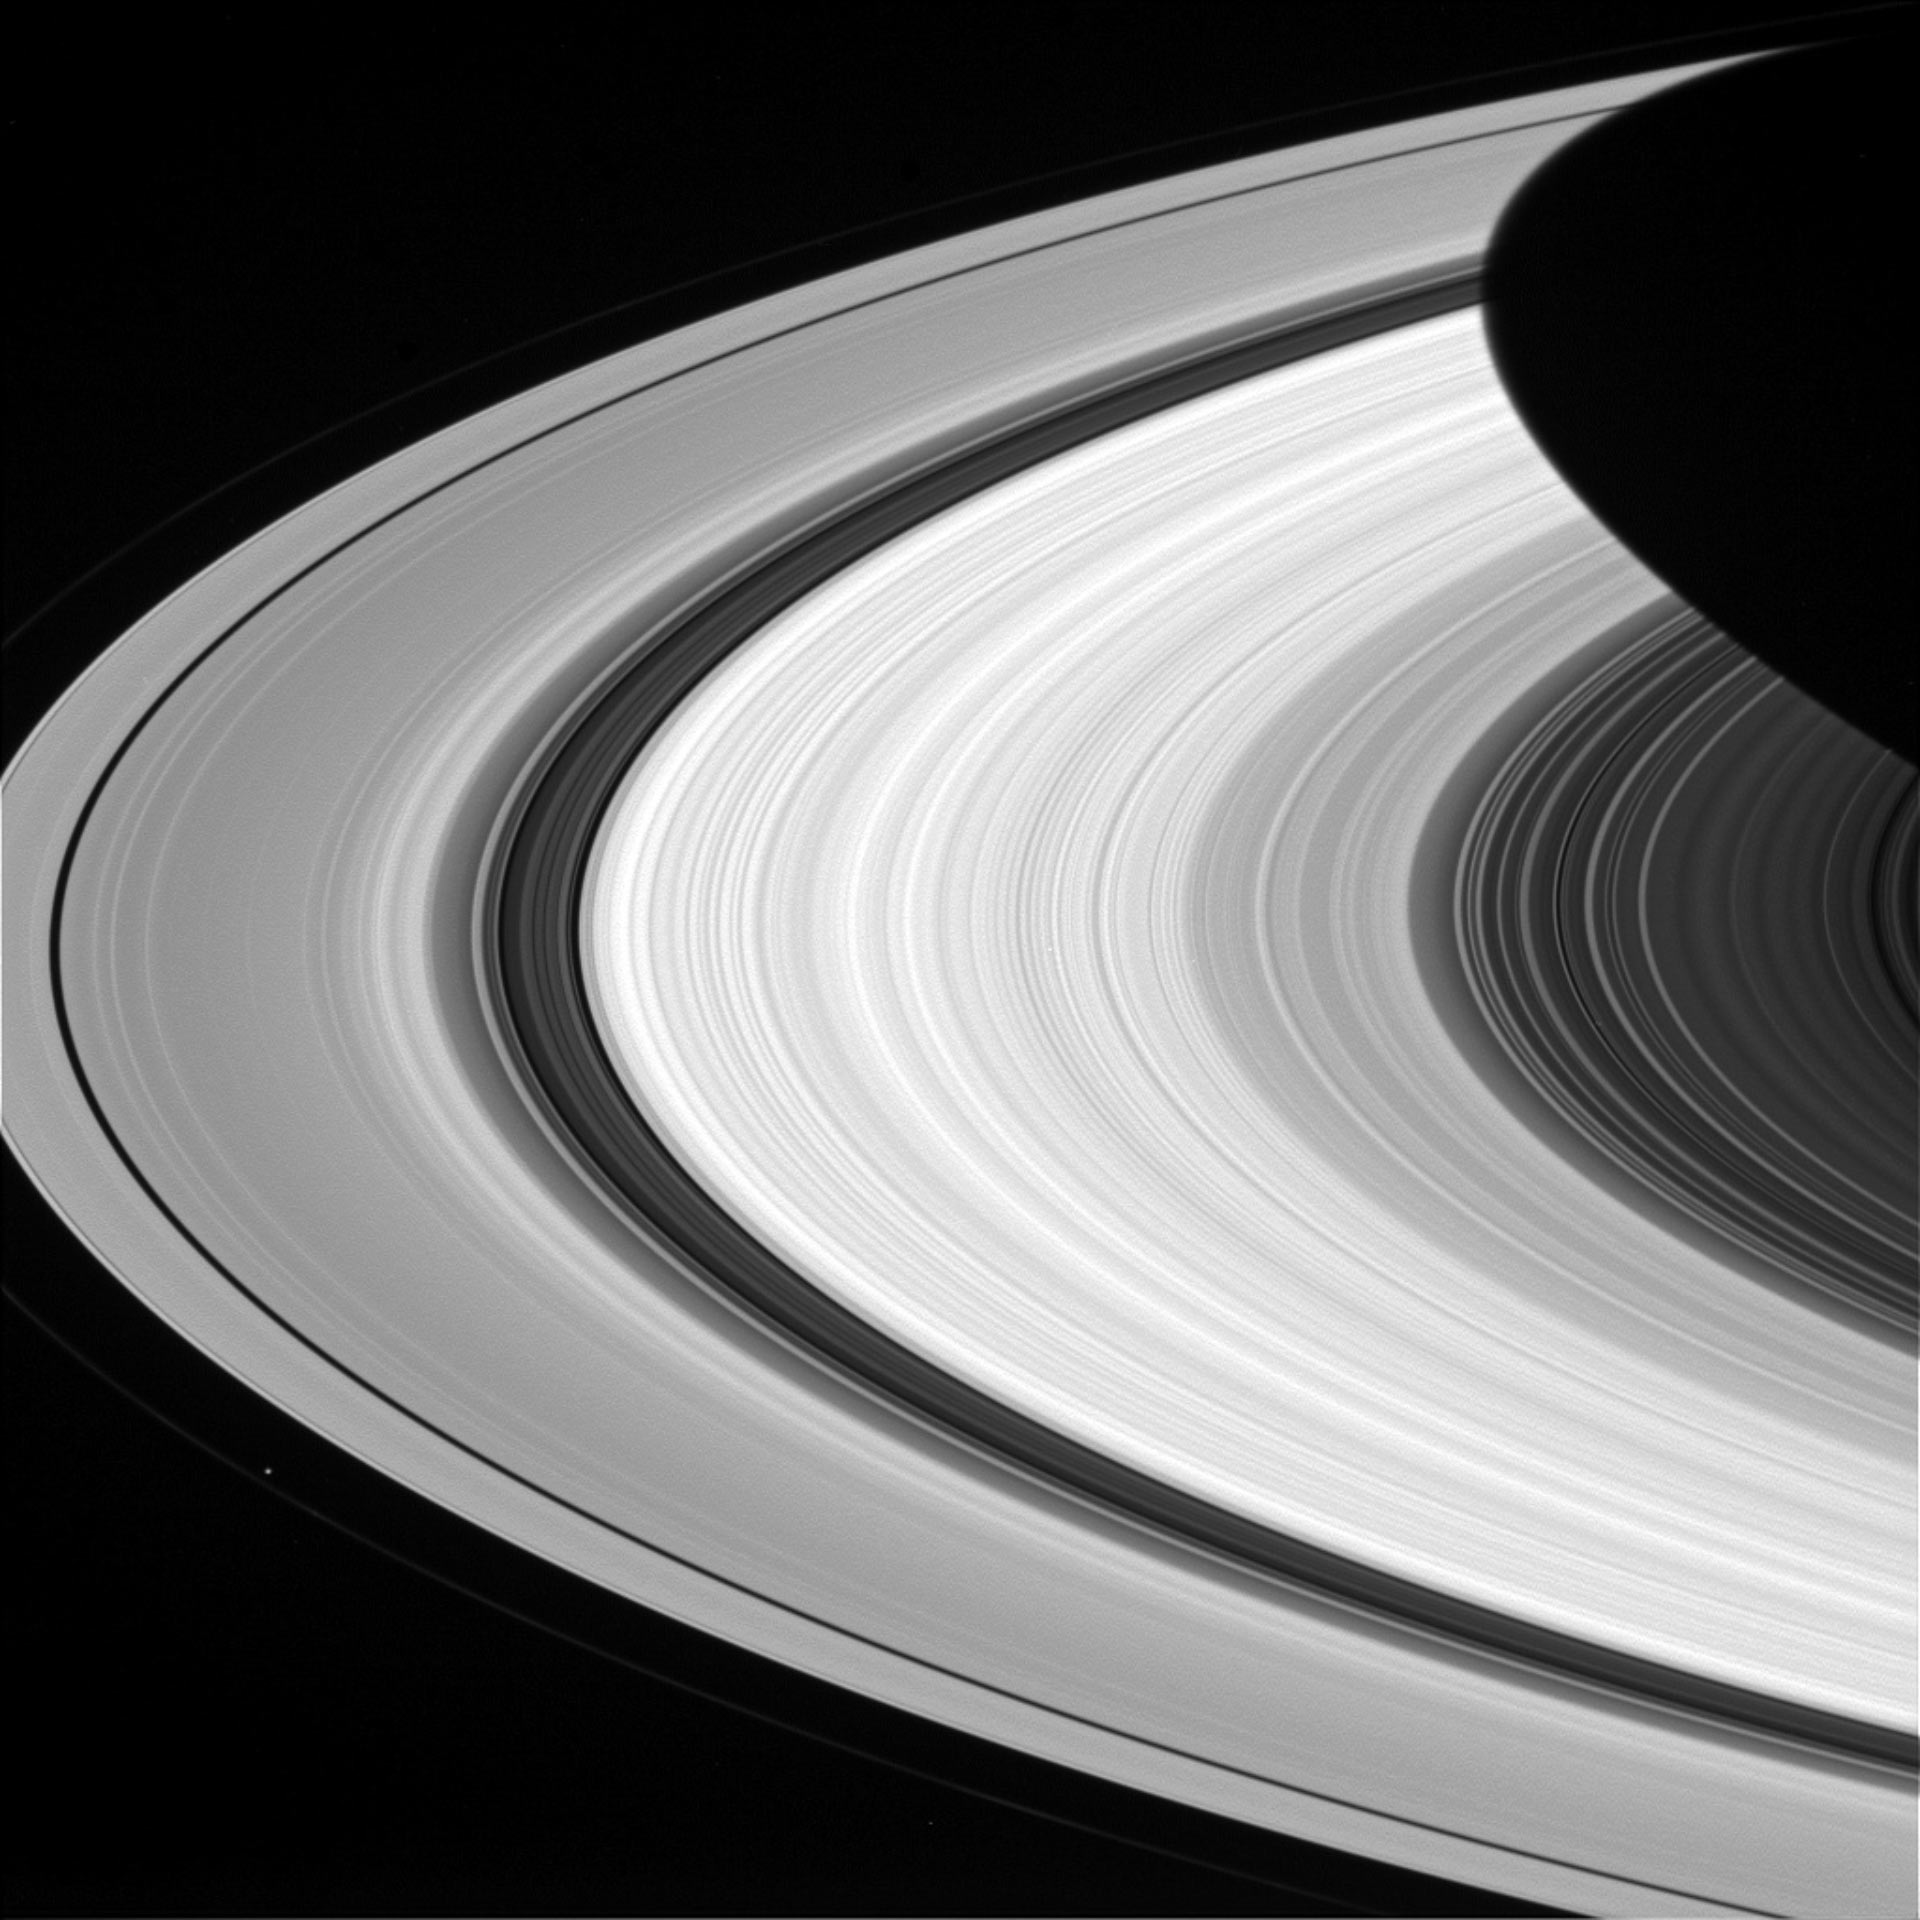 Saturn's Rings Close Up | Space Exploration | Sci-News.com